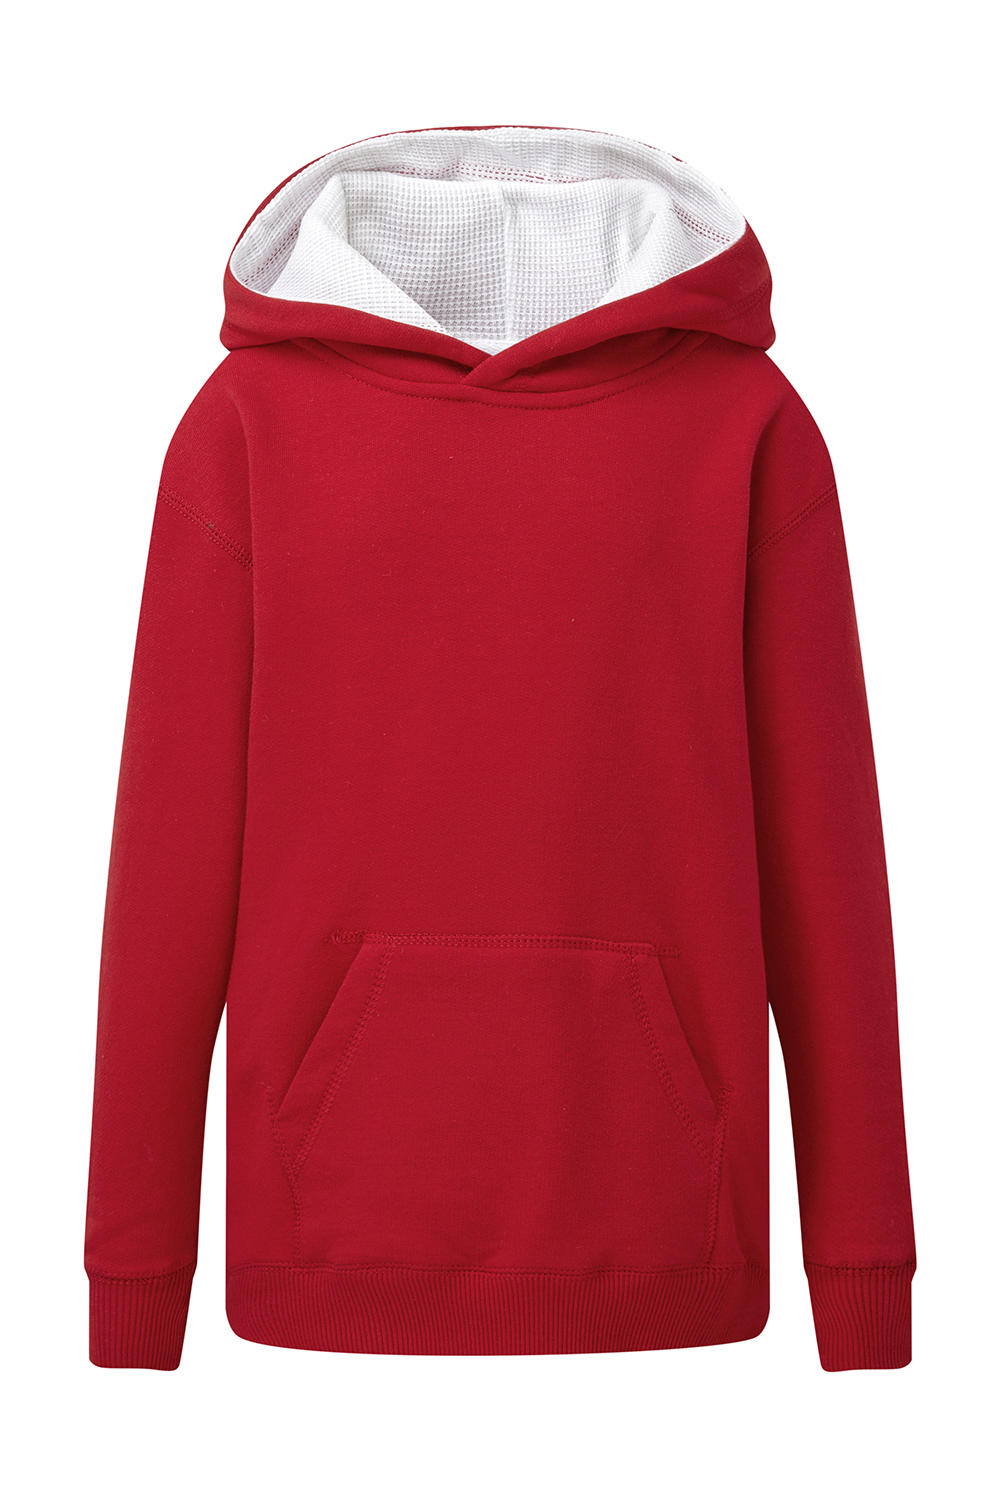  Kids Contrast Hoodie in Farbe Red/White